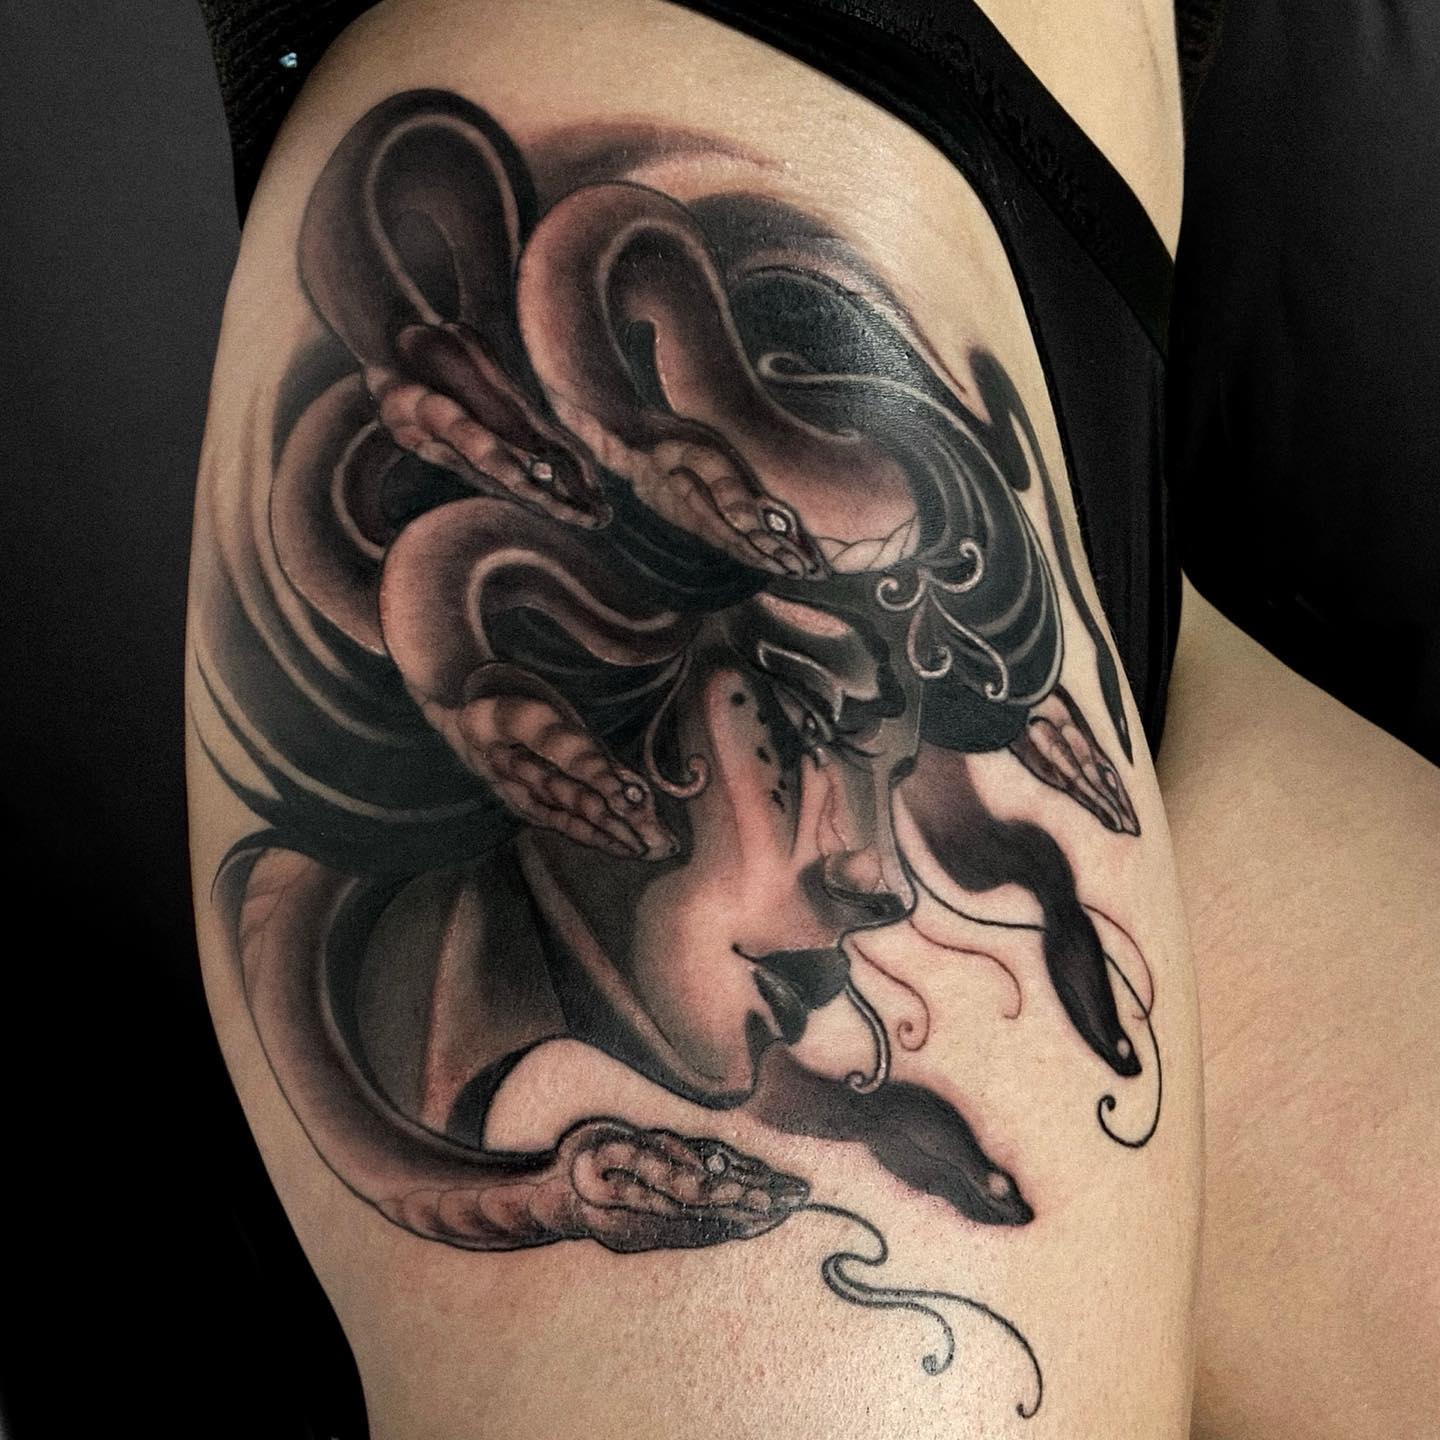 It's absolutely stunning! The side portrait of Medusa is drawn in a way that it looks perfect. You will feel the power of medusa on your upper arm, so what are you waiting for to get it?